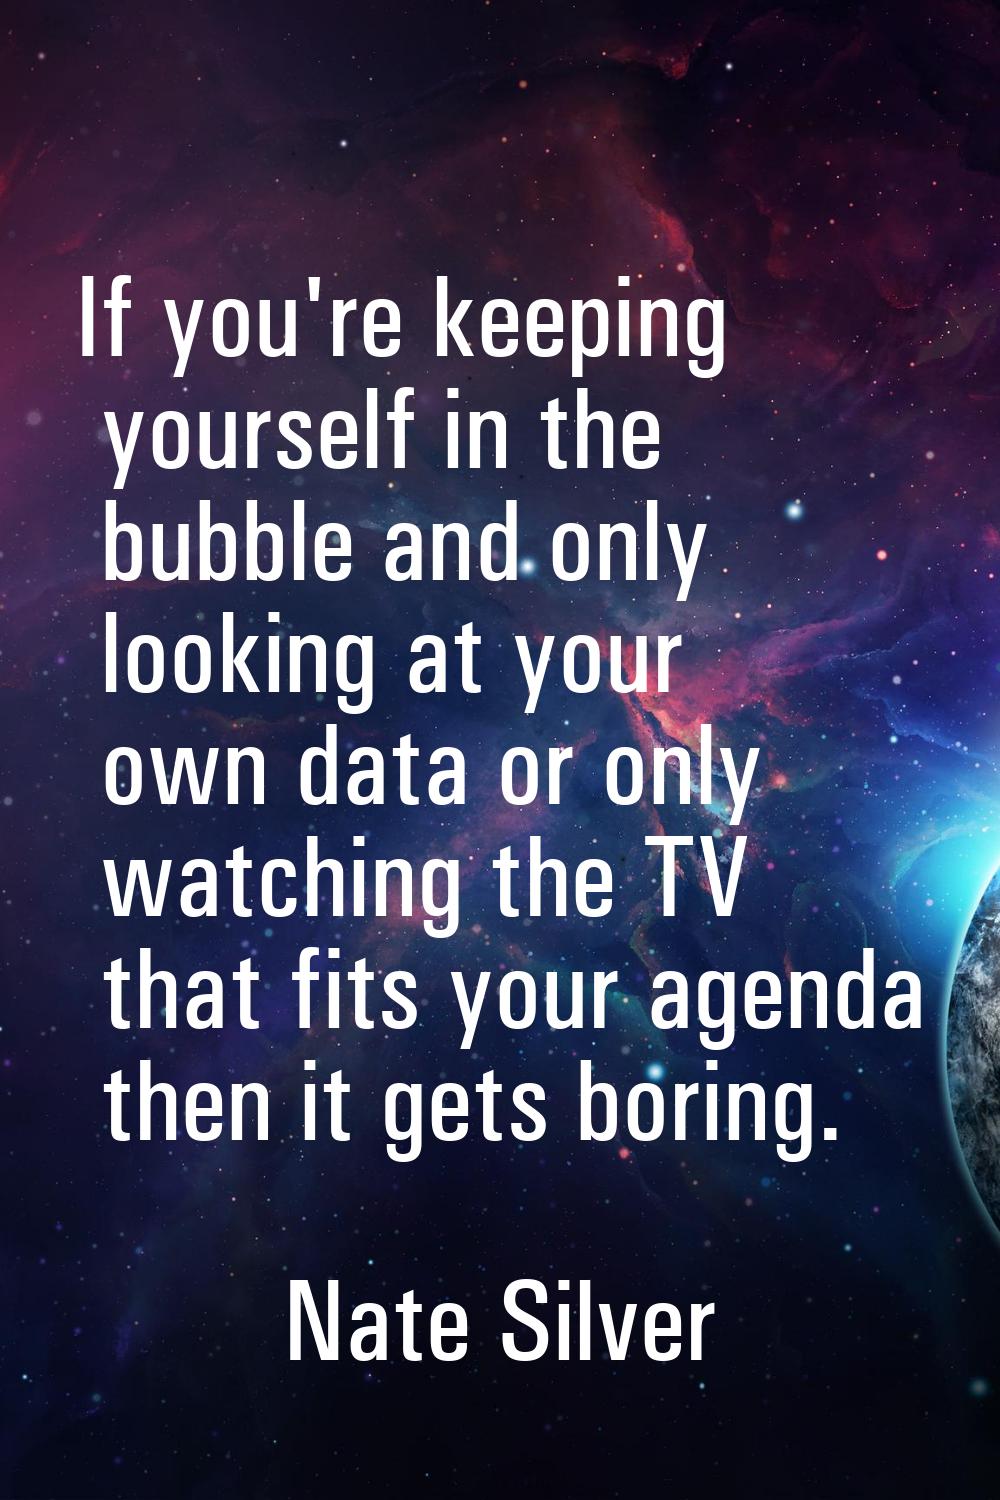 If you're keeping yourself in the bubble and only looking at your own data or only watching the TV 